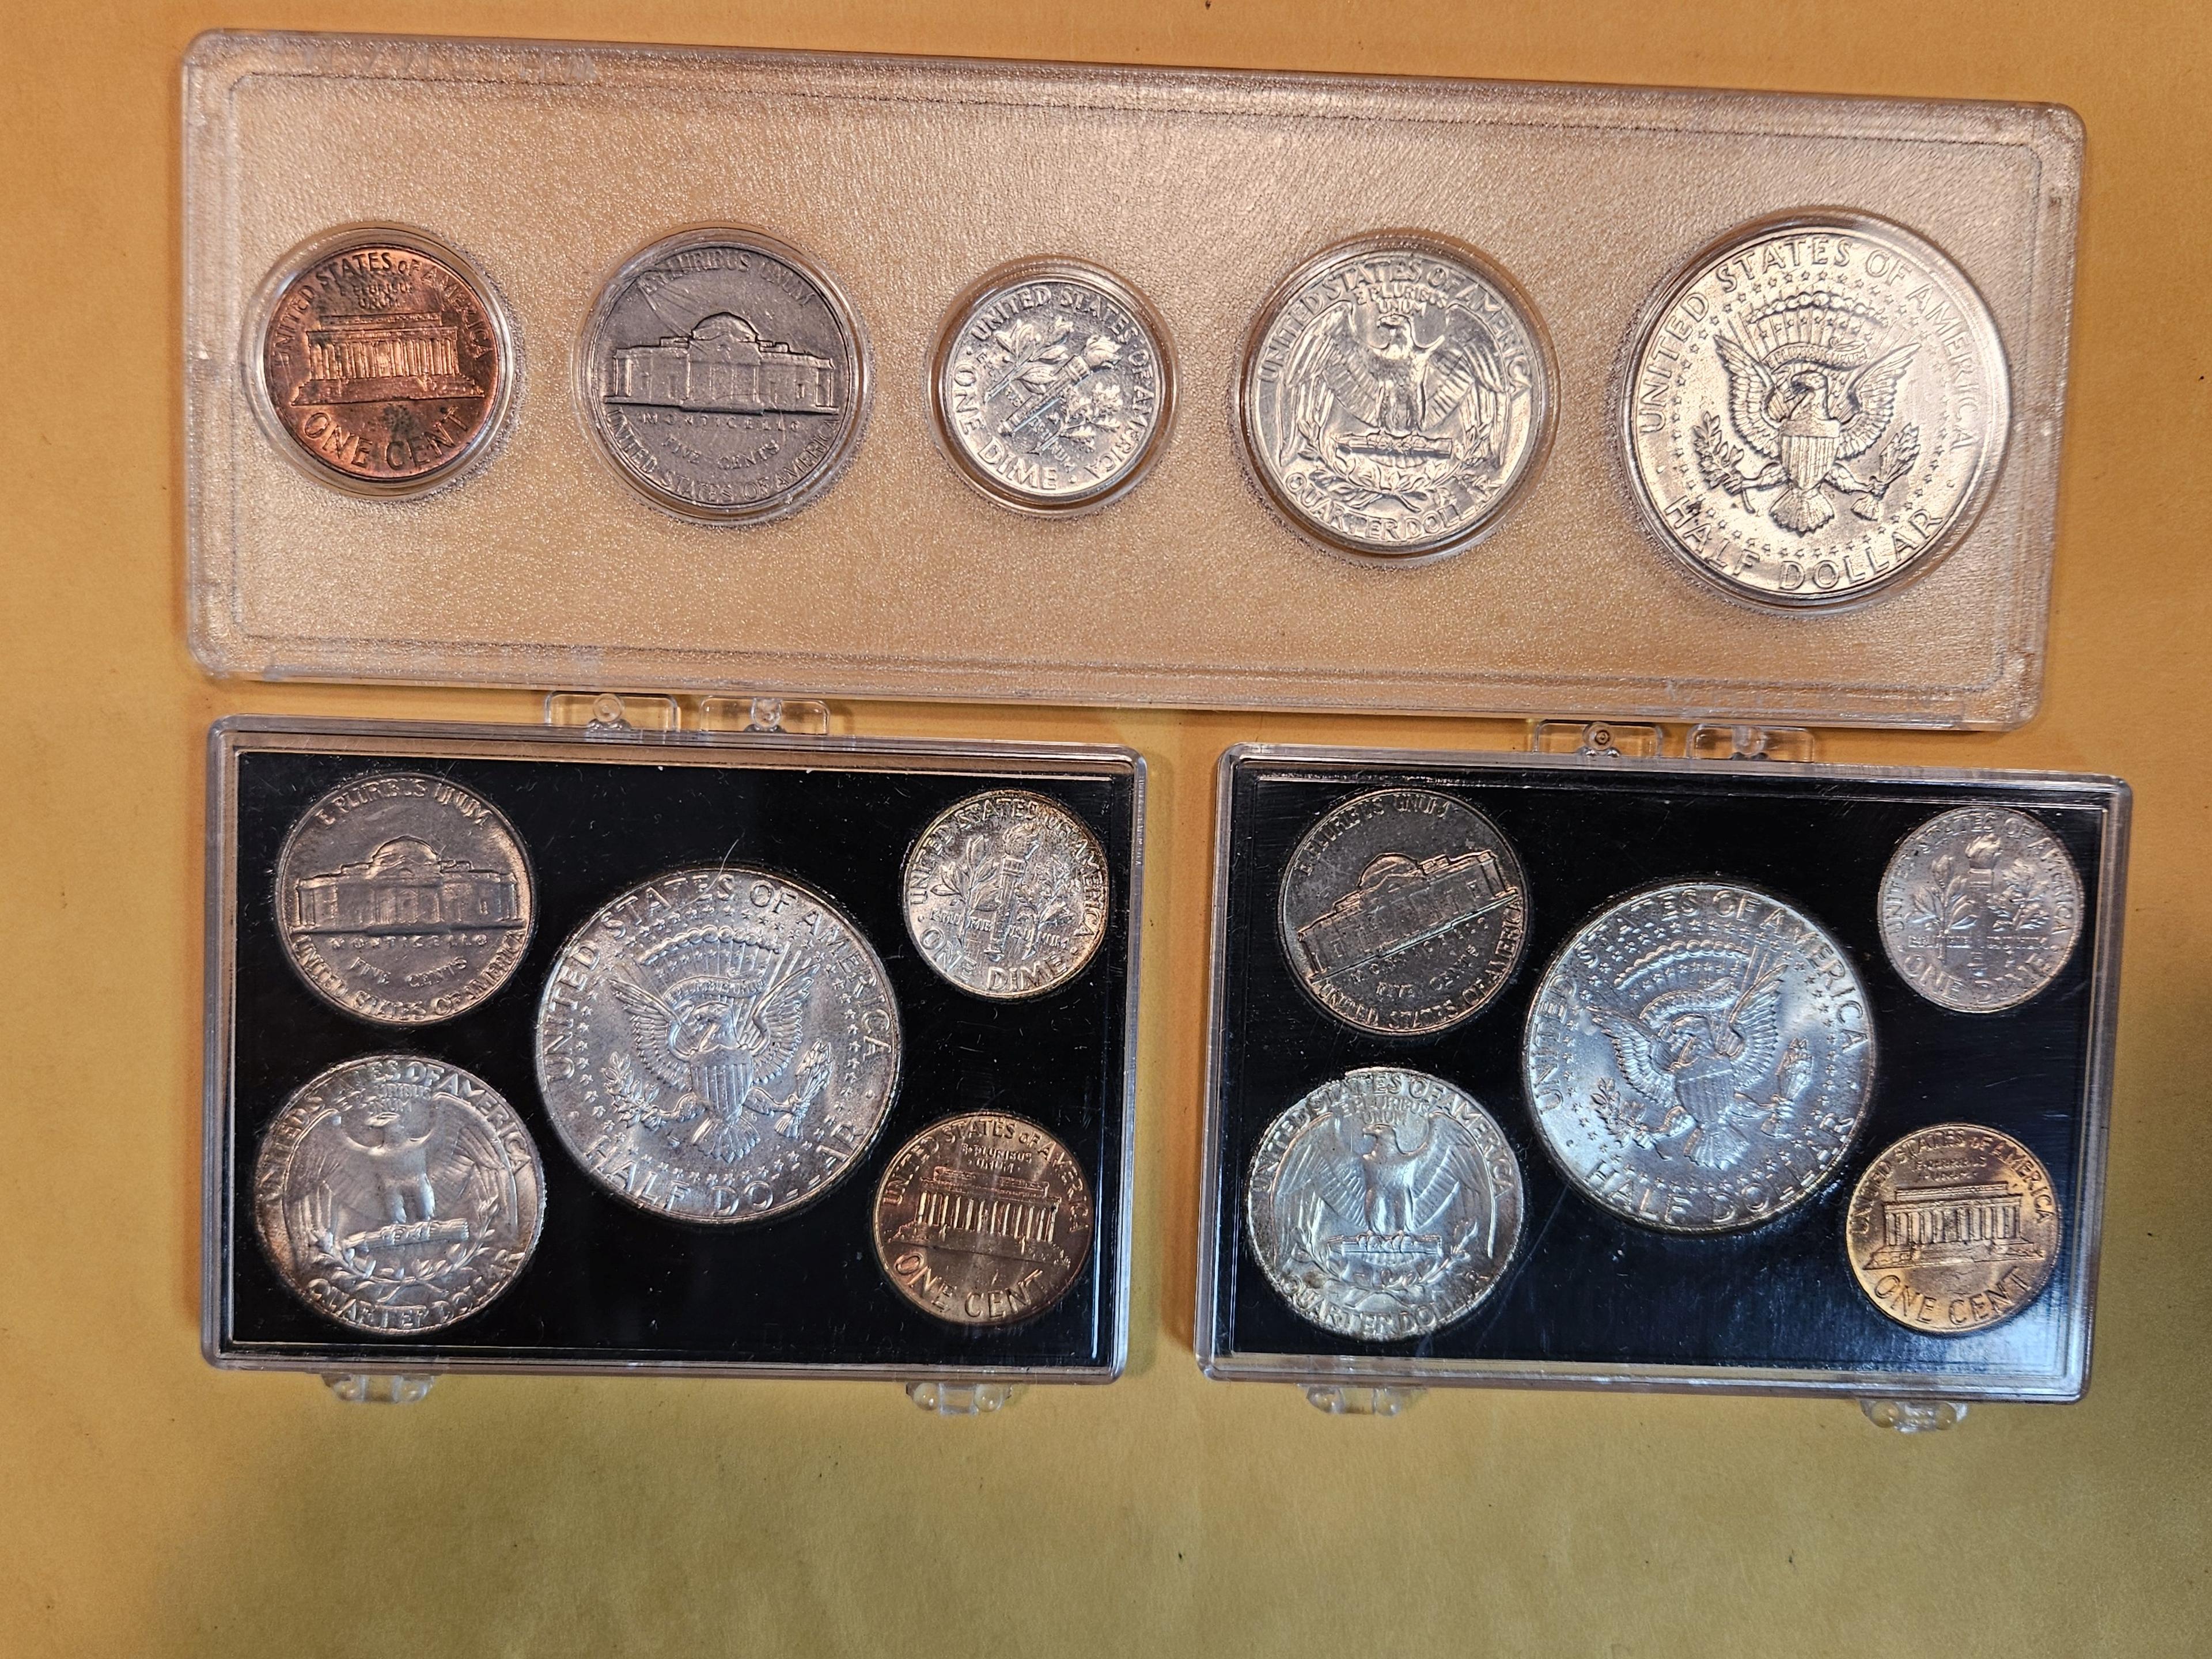 Three Brilliant Uncirculated 1964 Year Coin sets